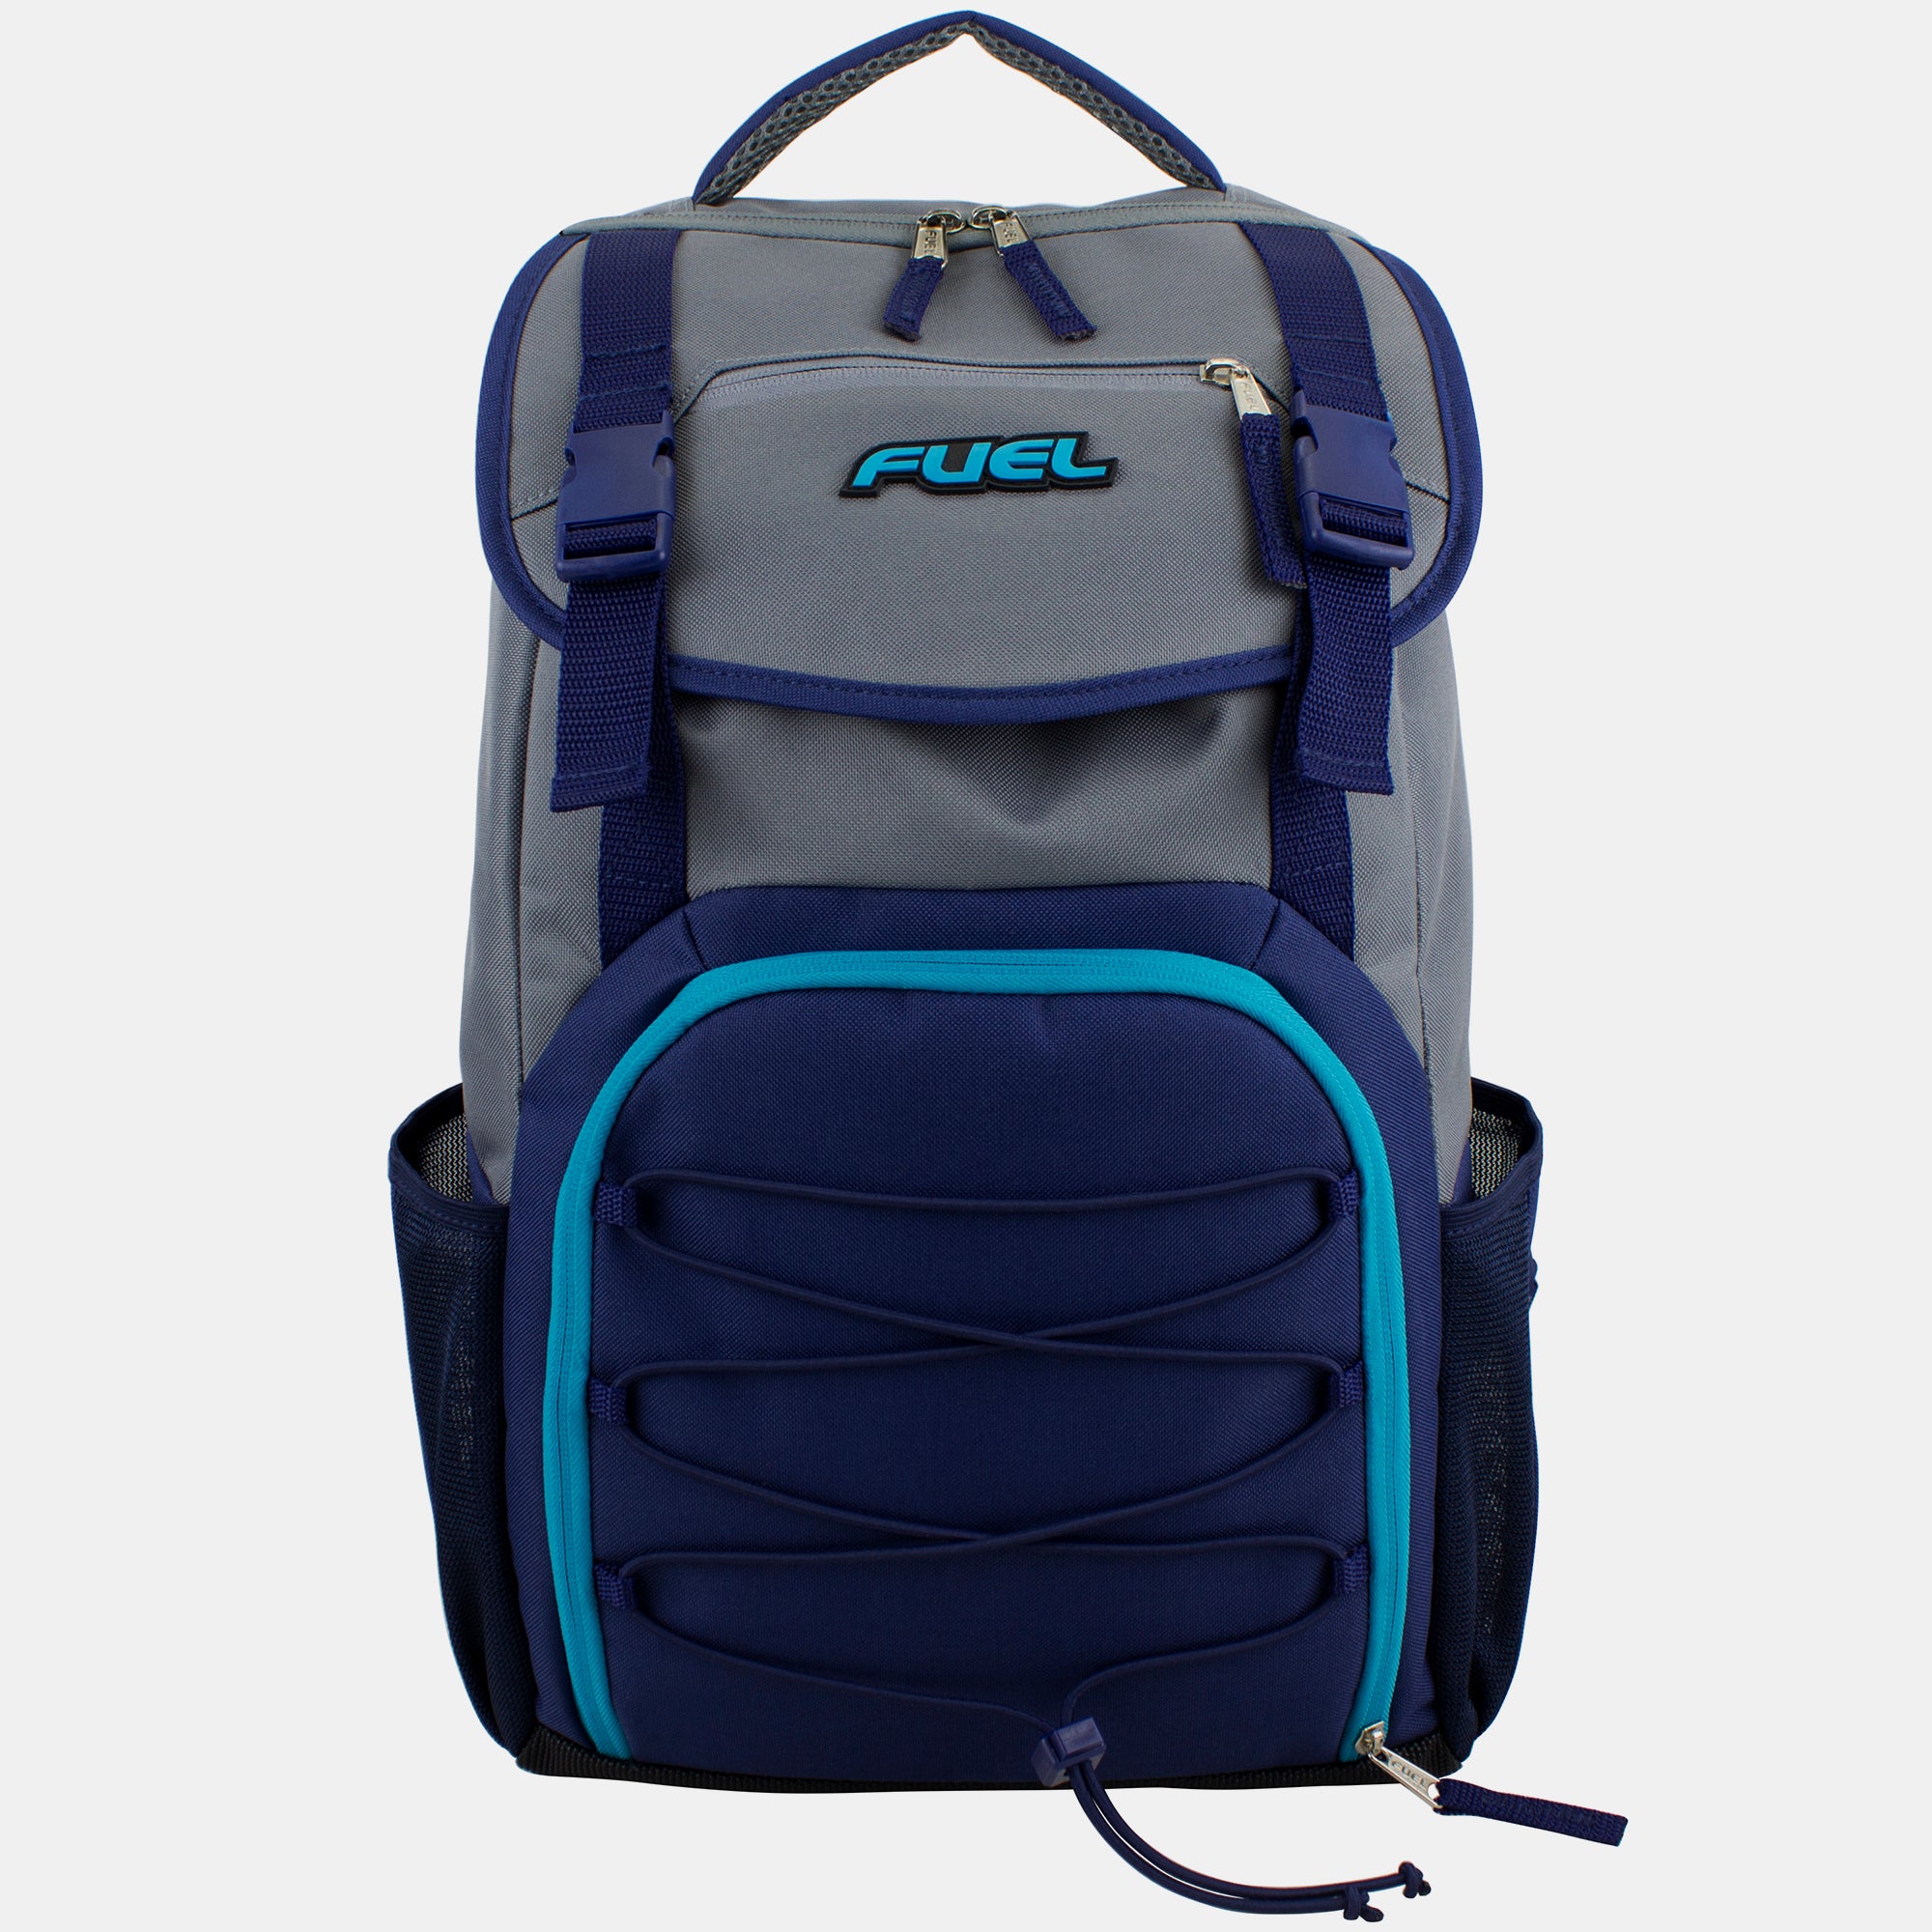 Fuel Triumph Backpack